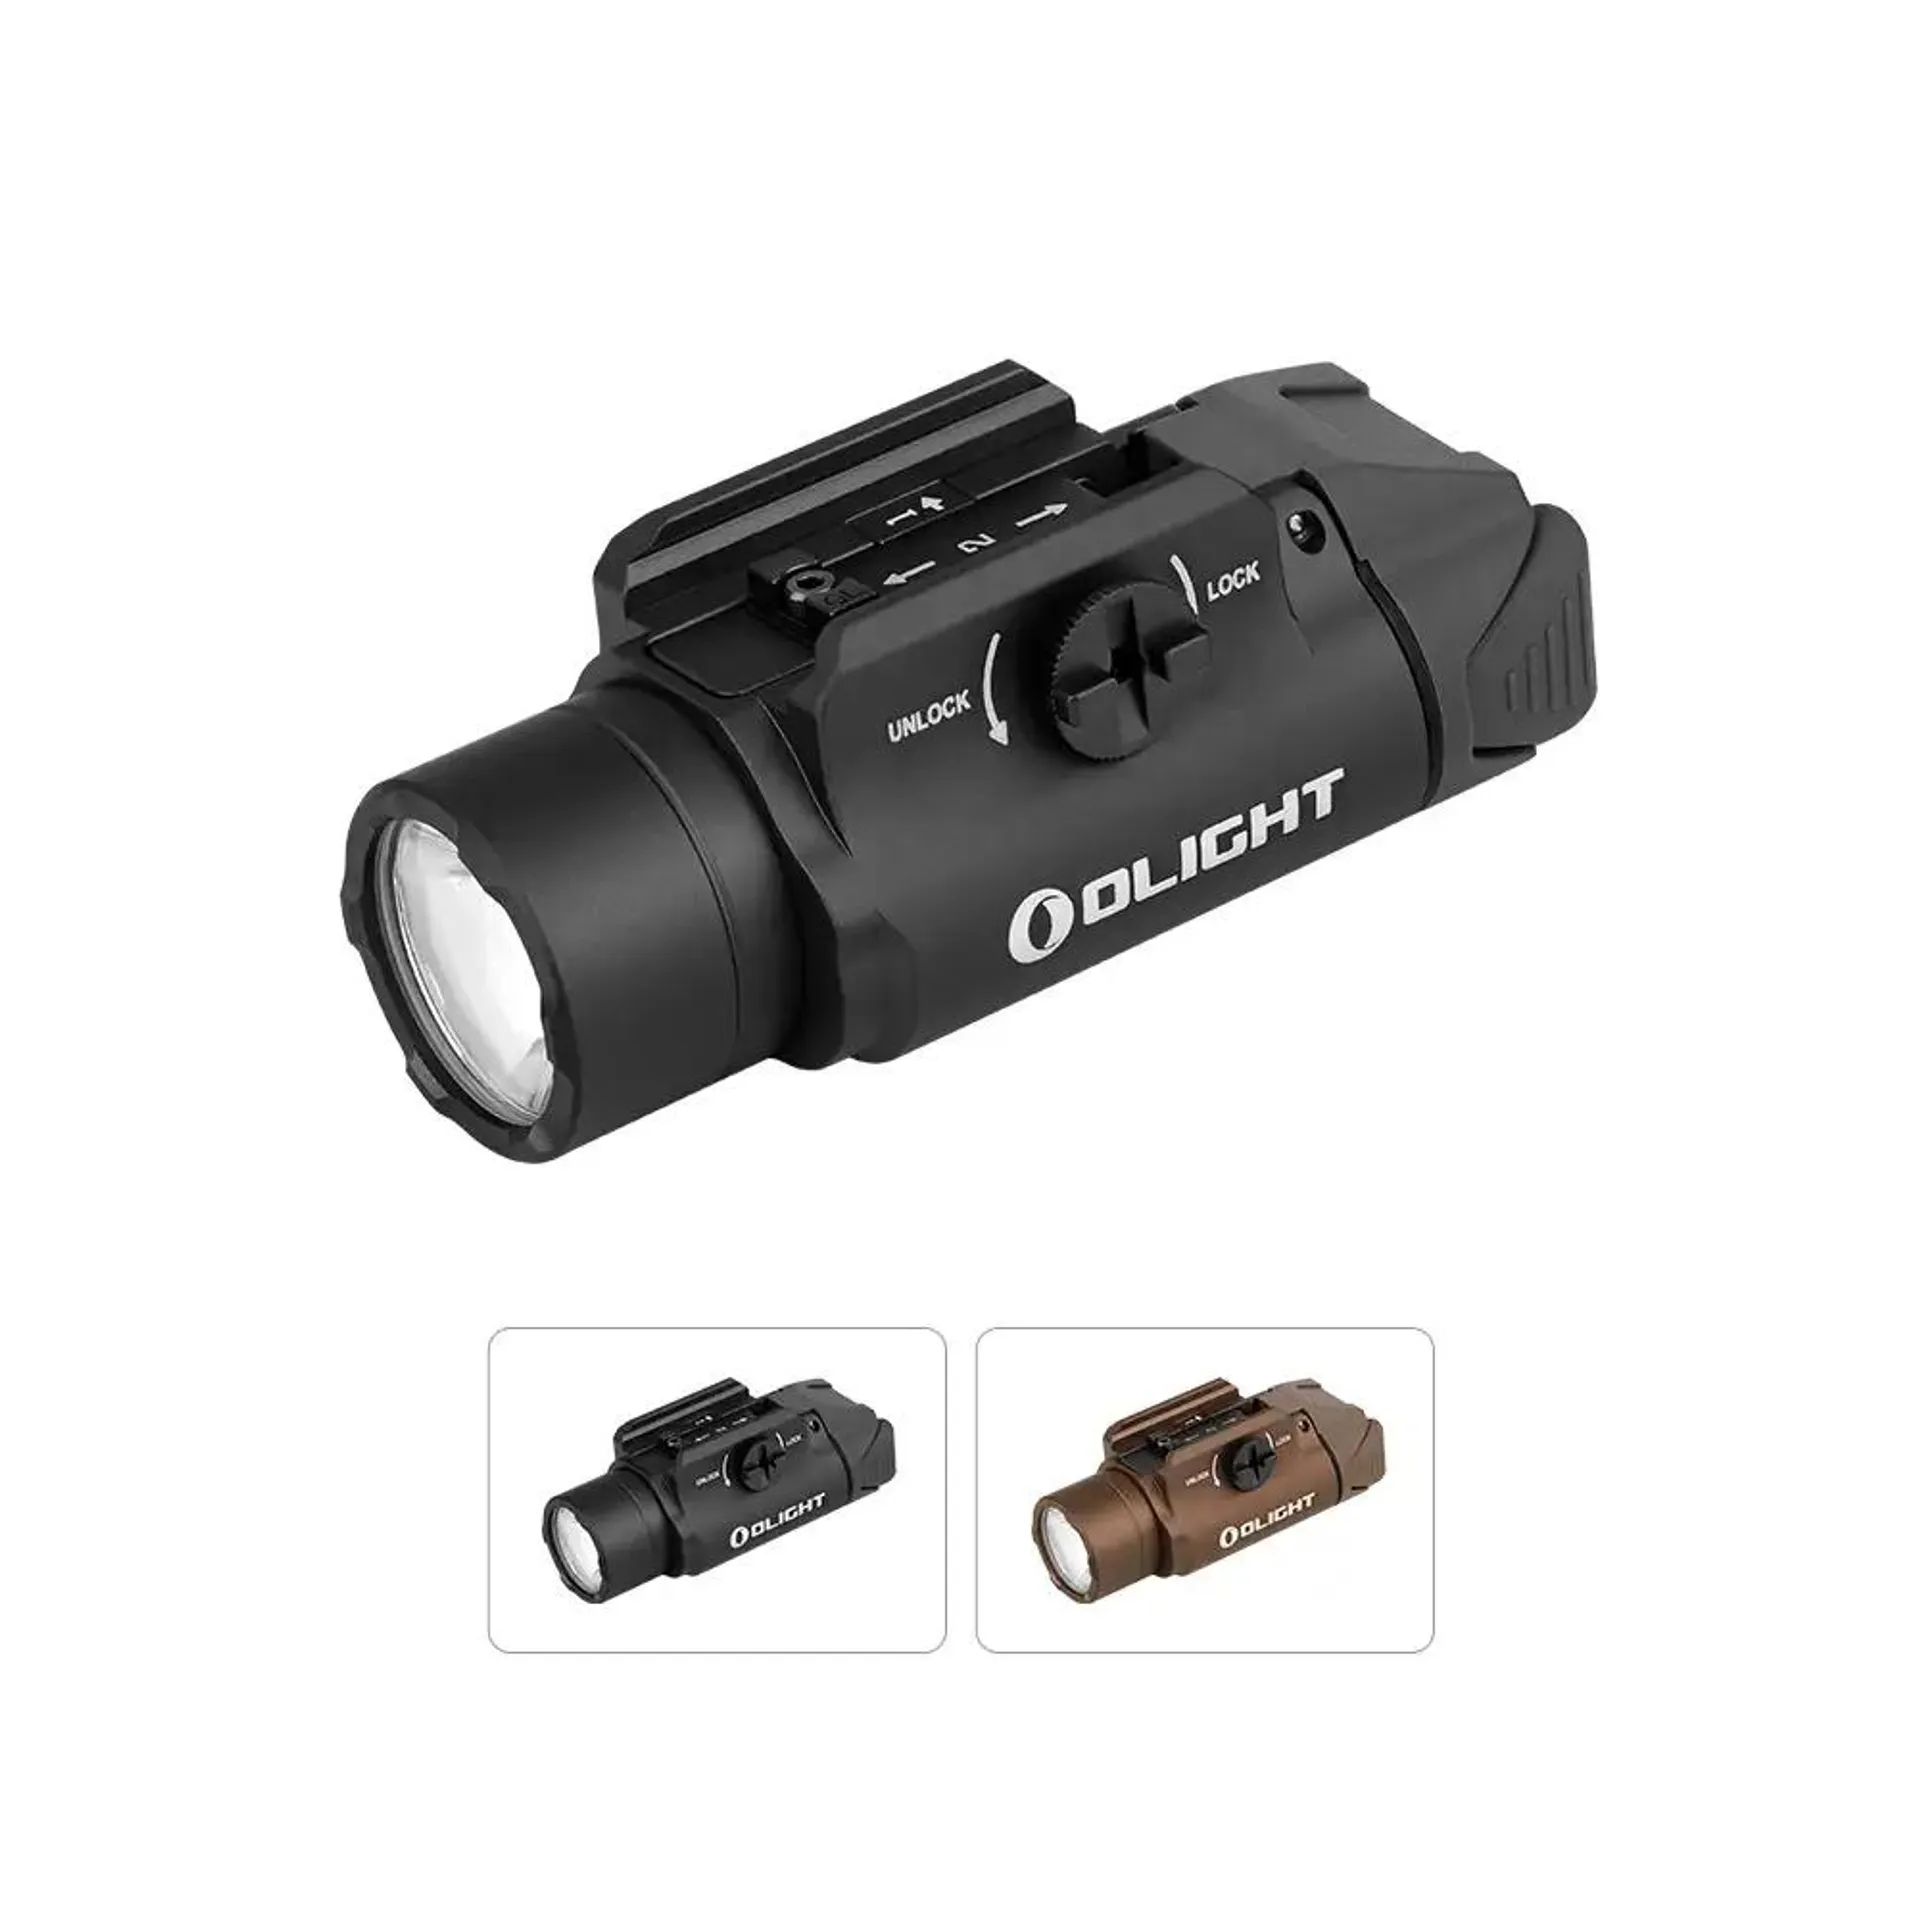 Olight PL-3R Valkyrie | lampe tactique rechargeable 1500 lumens